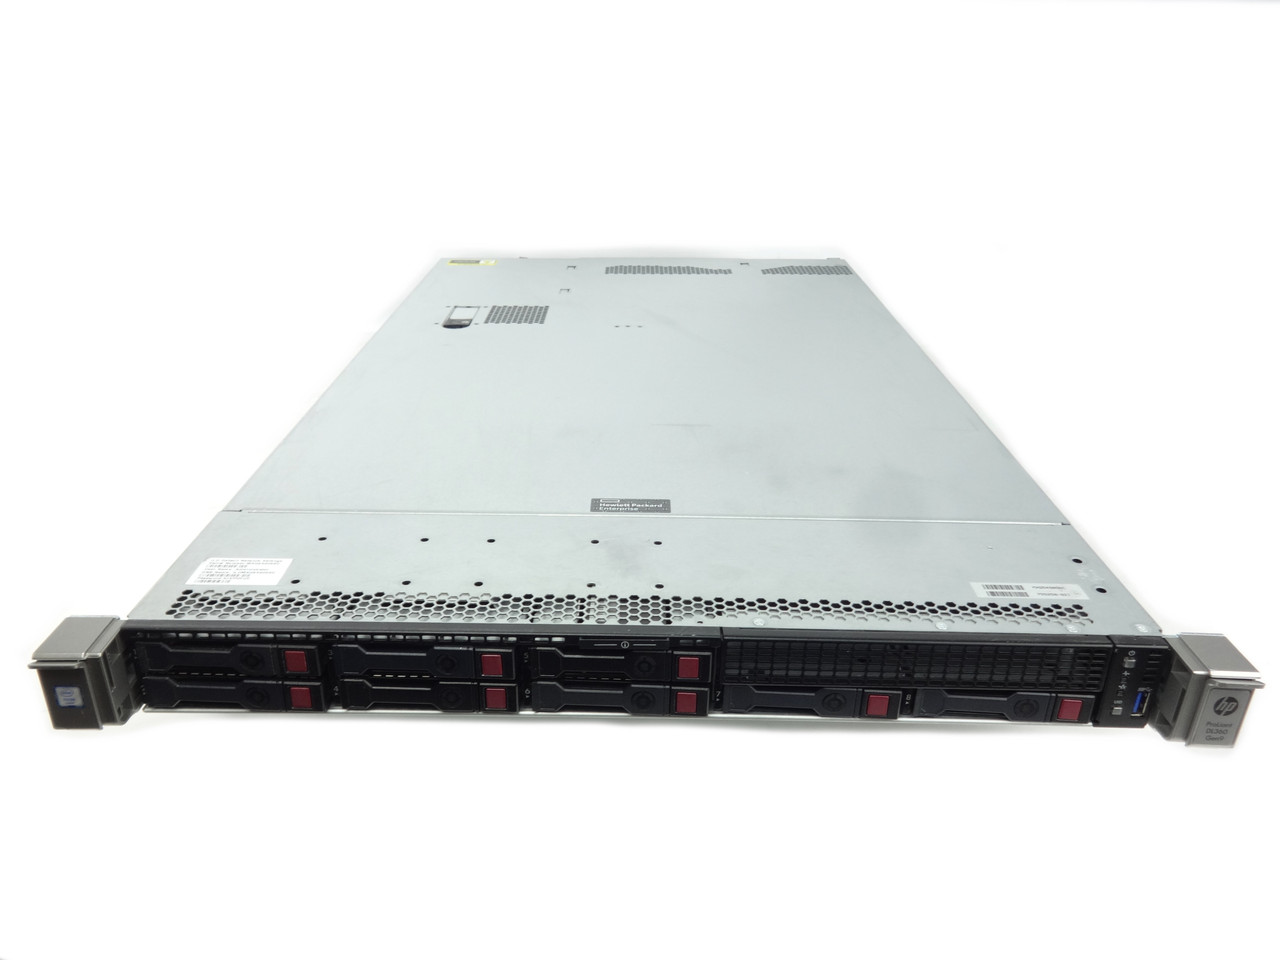 HPE Proliant DL360 G9 8x 2.5" Server Build to Order